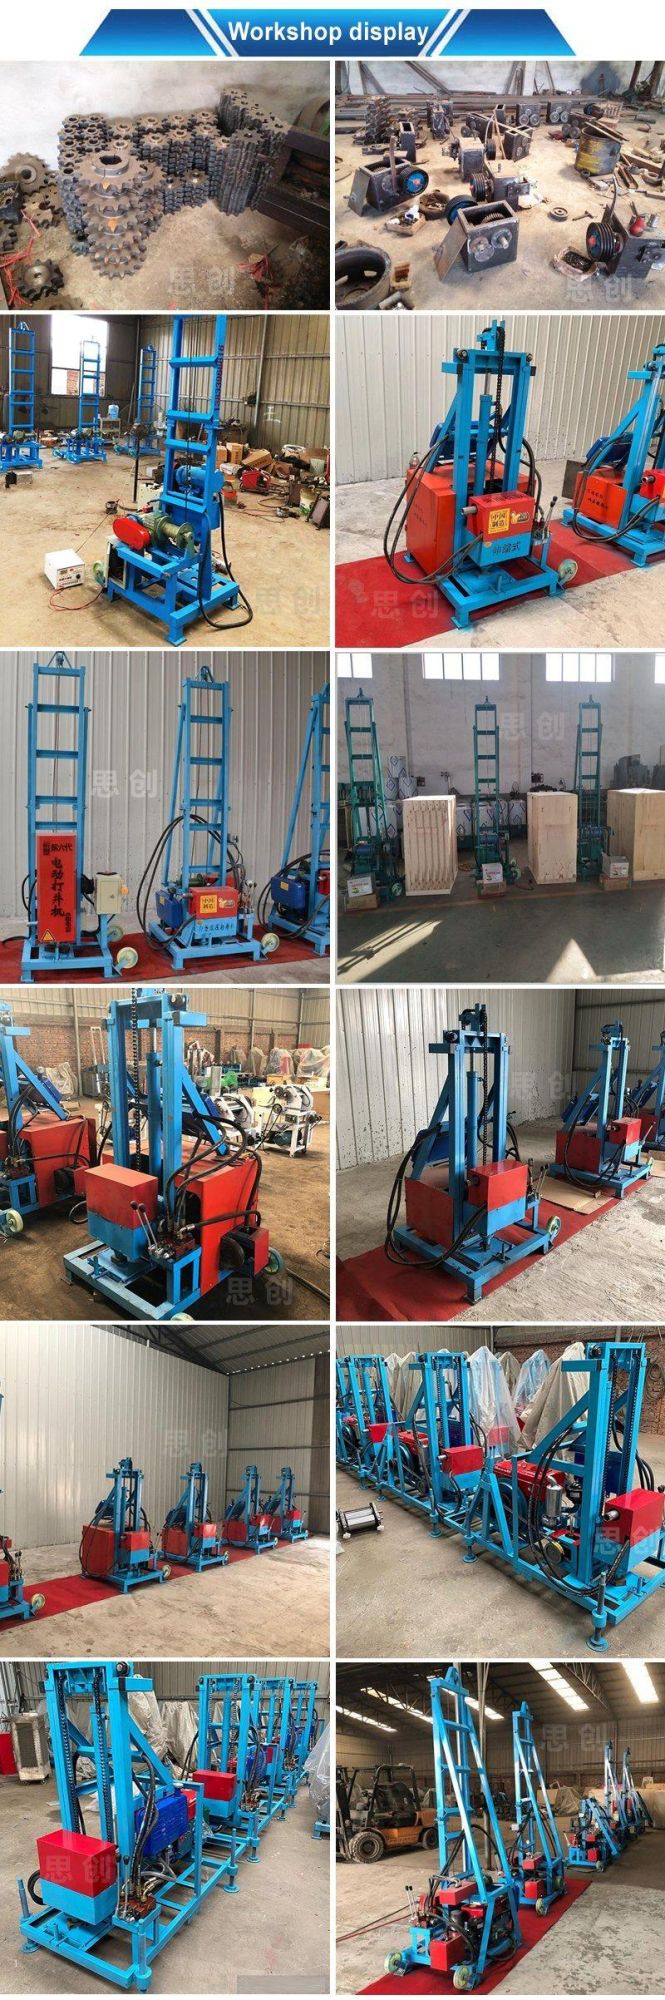 Electric Water Well Drilling Rig/60m Portable Water Well Drilling Machines